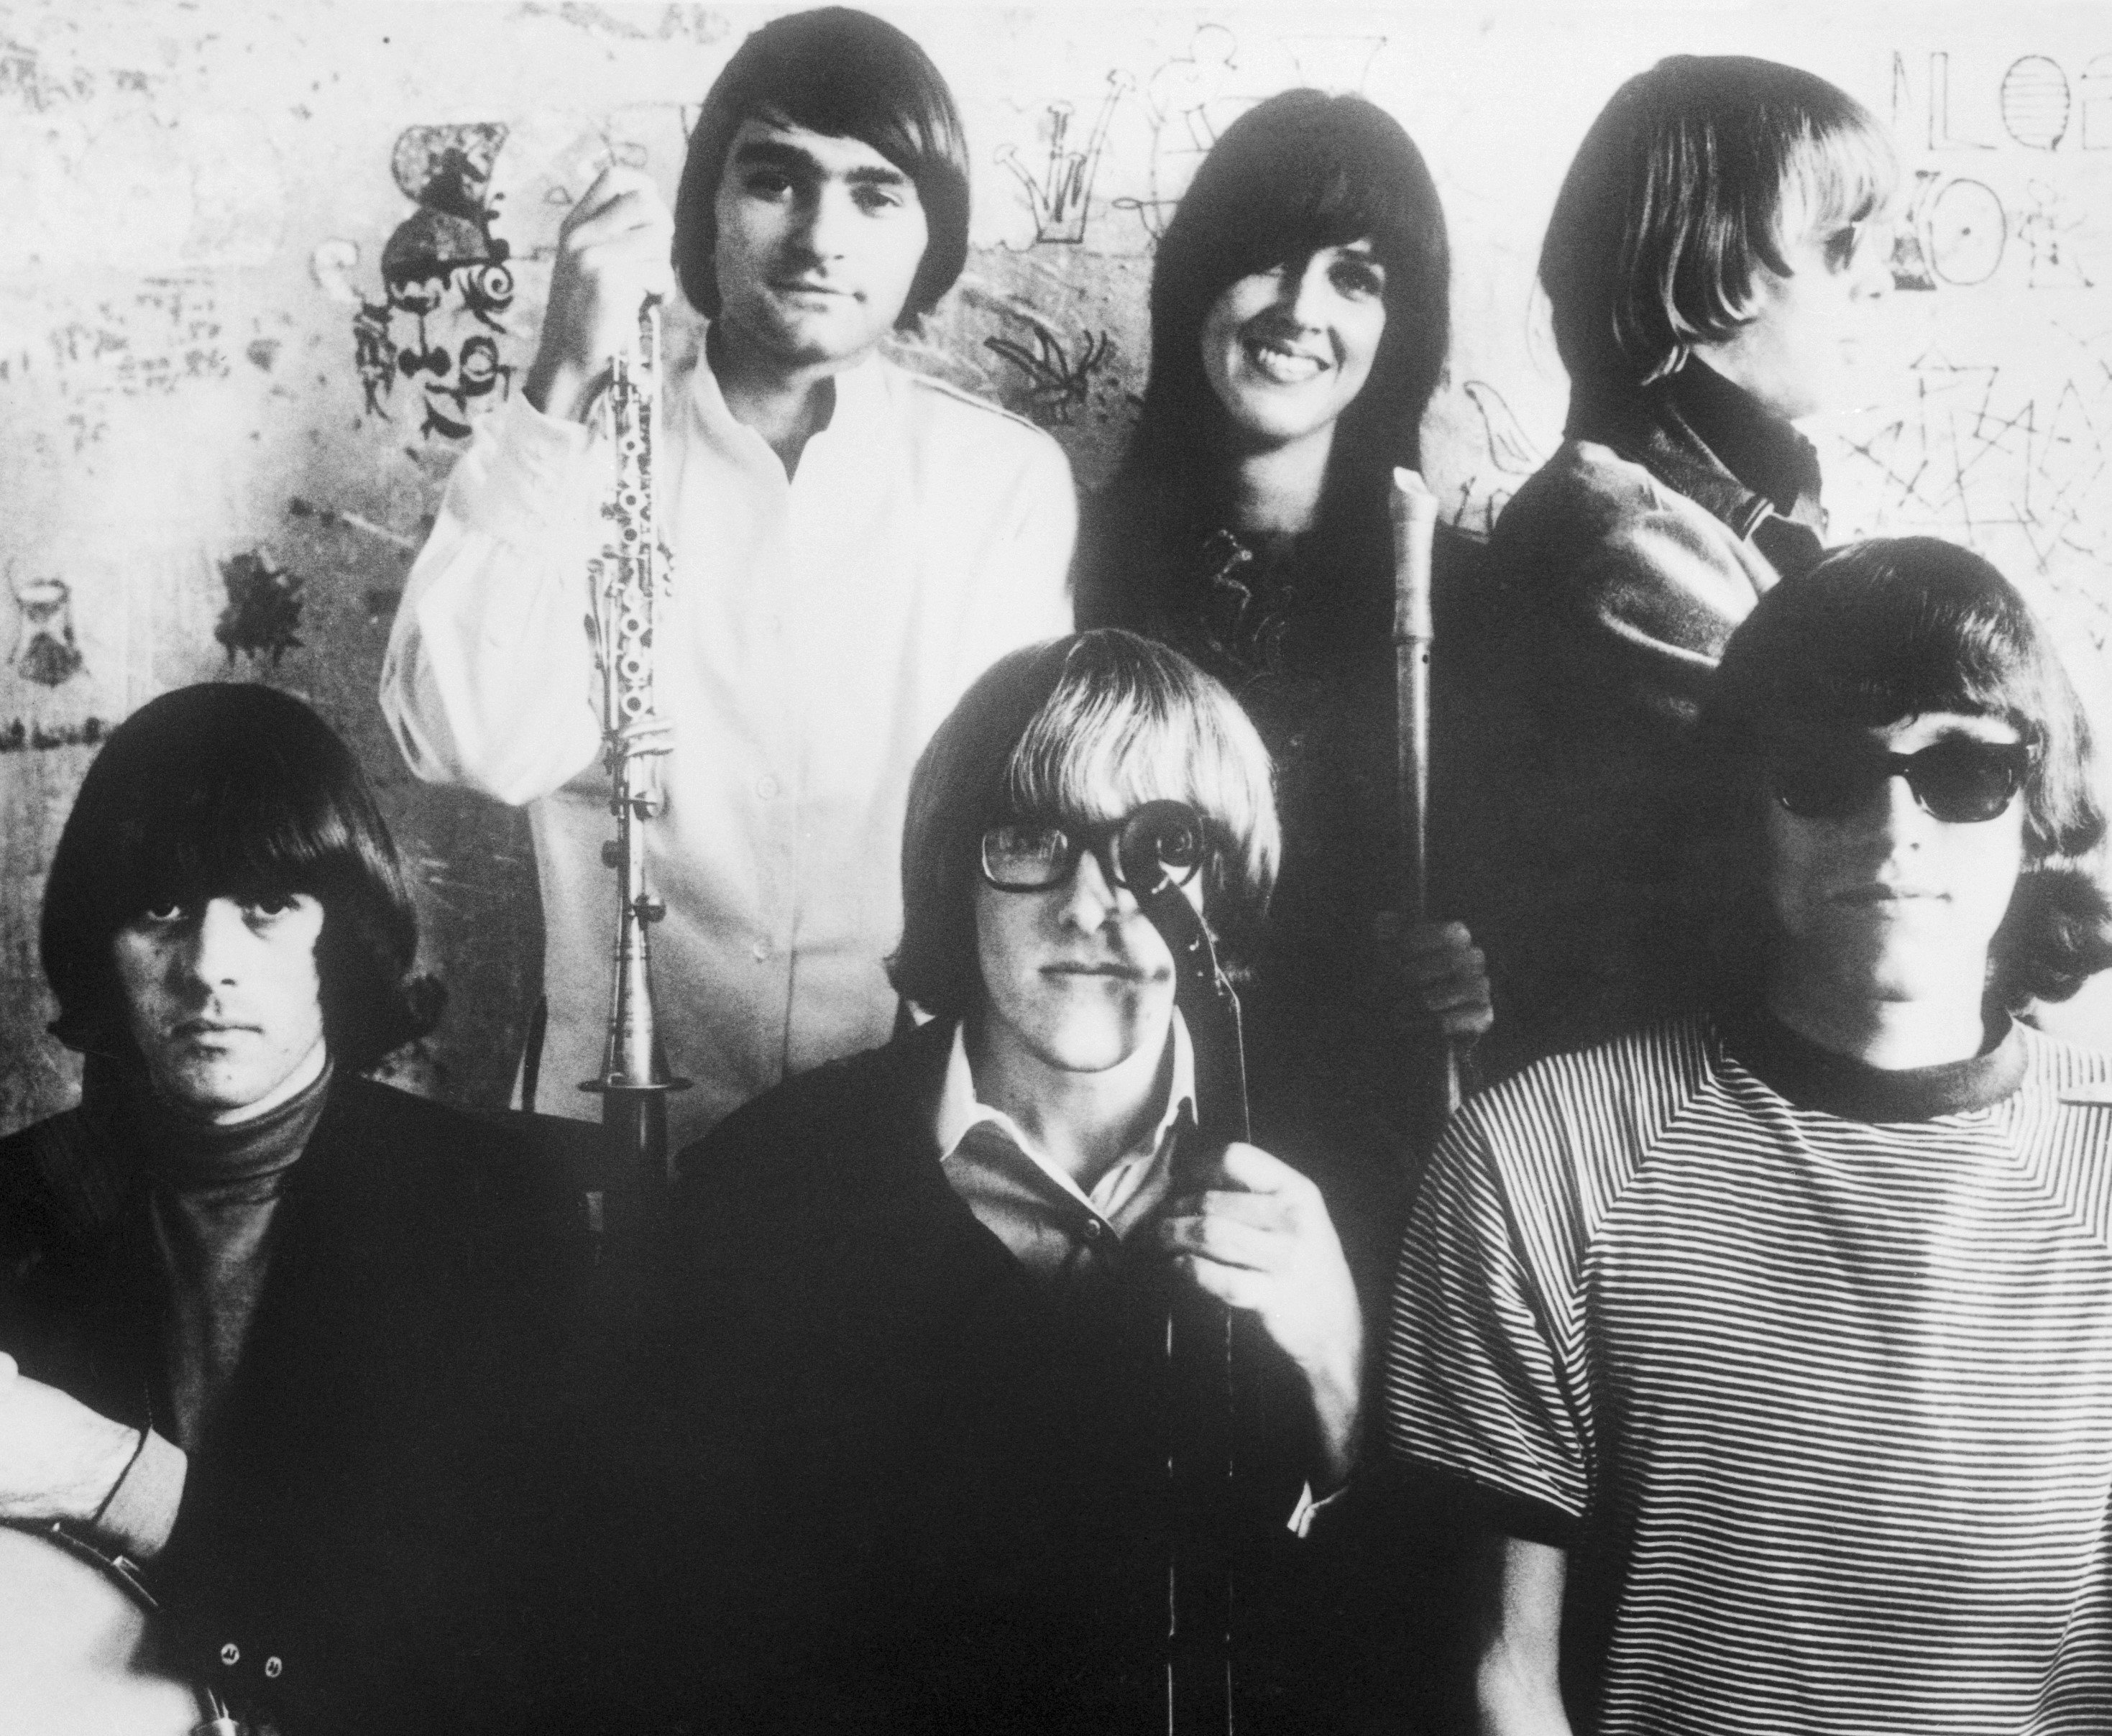 Jefferson Airplane in black-and-white during the "White Rabbit" and "Somebody to Love" era